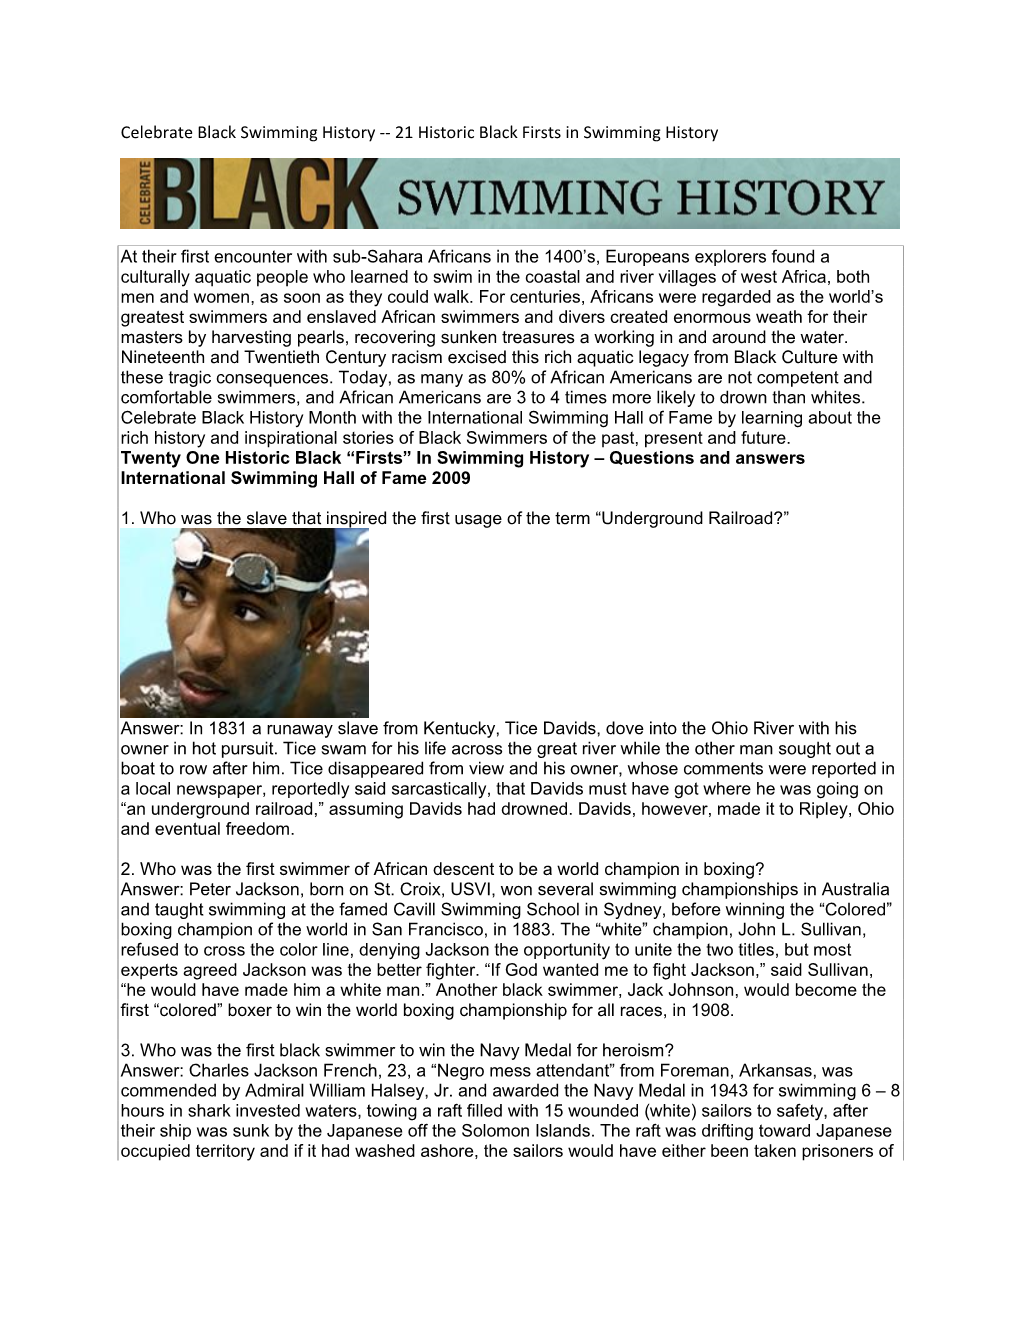 21 Historic Black Firsts in Swimming History